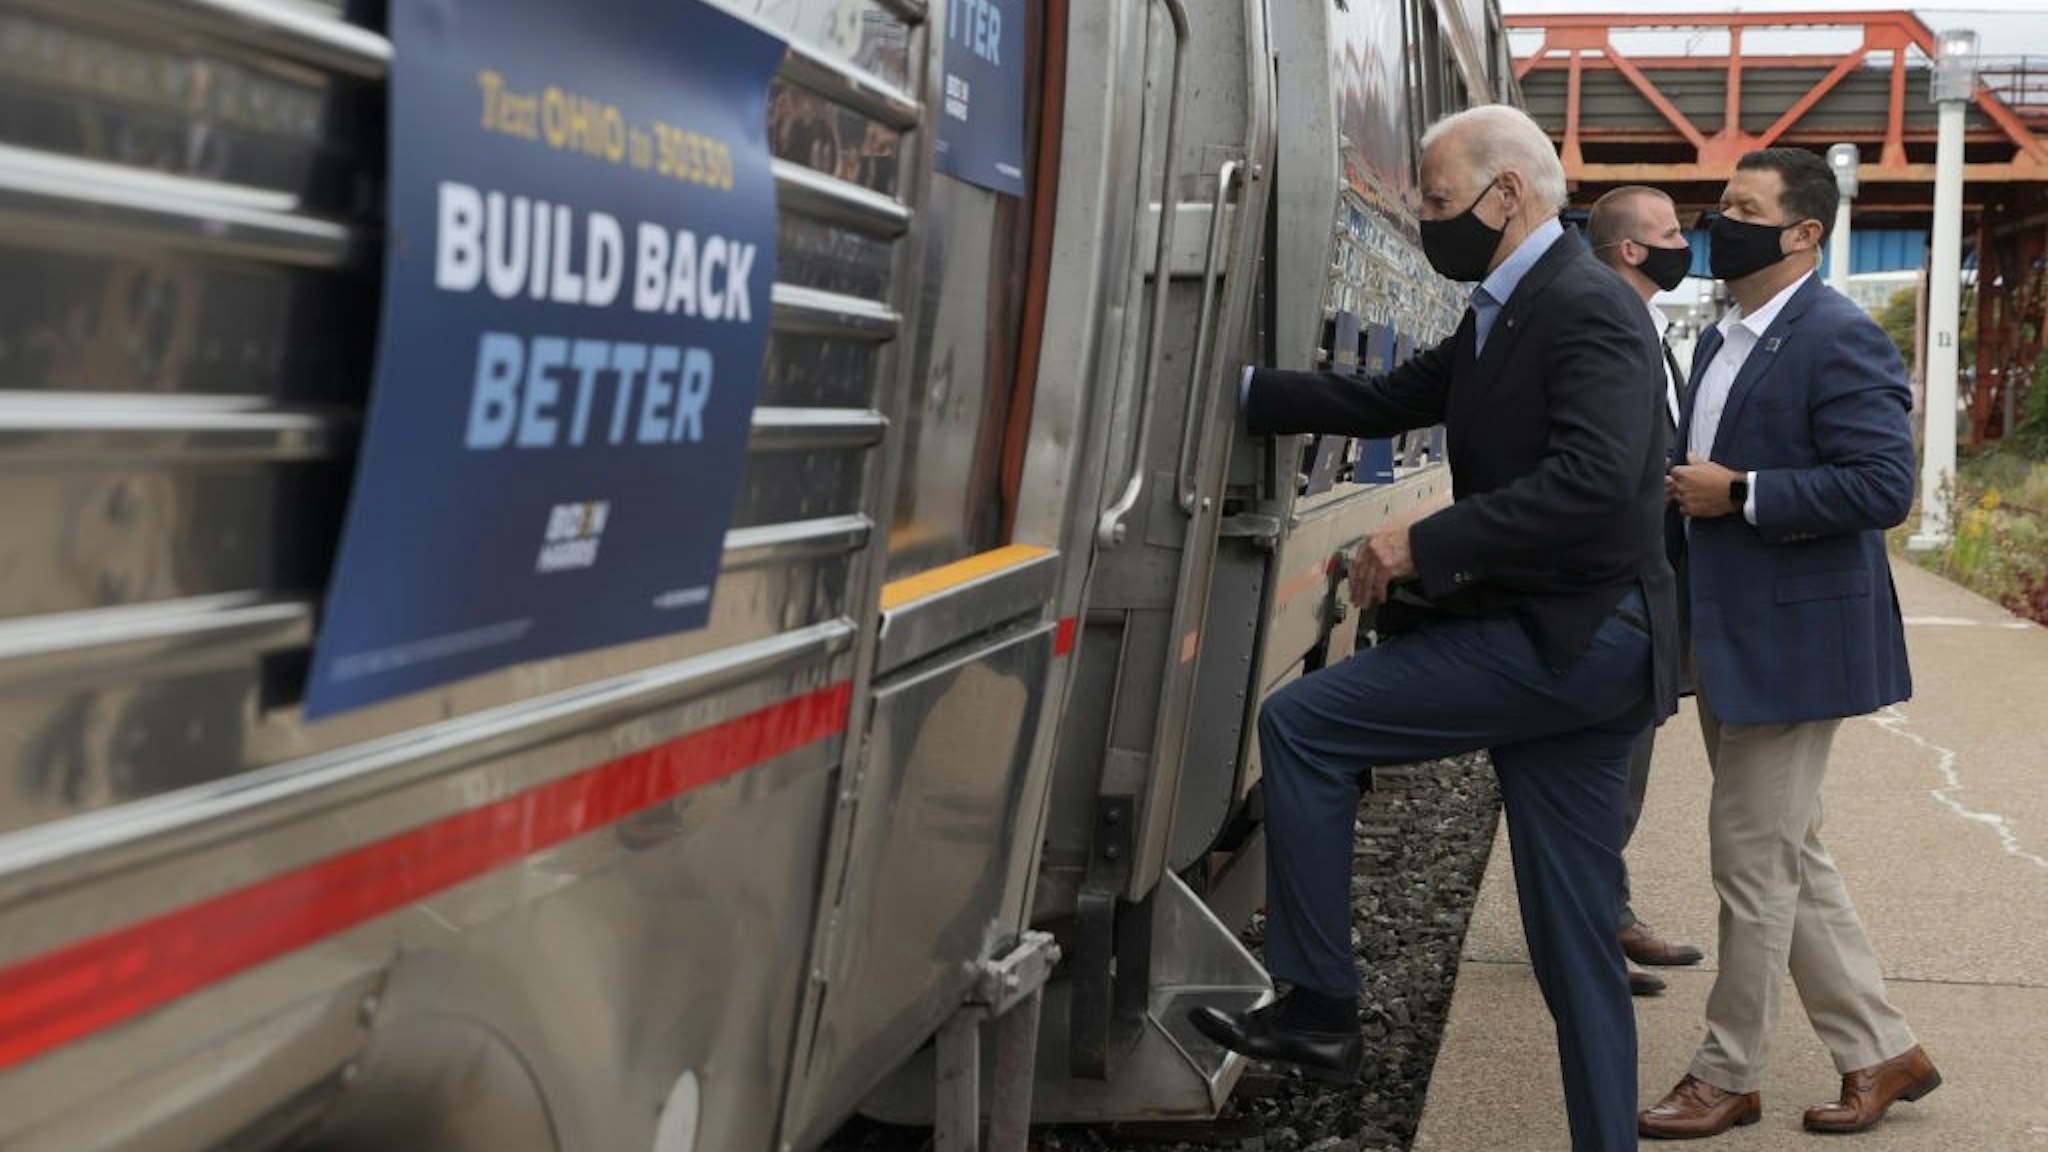 CLEVELAND, OHIO - SEPTEMBER 30: Democratic U.S. presidential nominee Joe Biden embarks on a train campaign tour at the Cleveland Amtrak Station September 30, 2020 in Cleveland, Ohio. Former Vice President Biden continues to campaign for the upcoming presidential election today on a day-long train tour with stops in Ohio and Pennsylvania. (Photo by